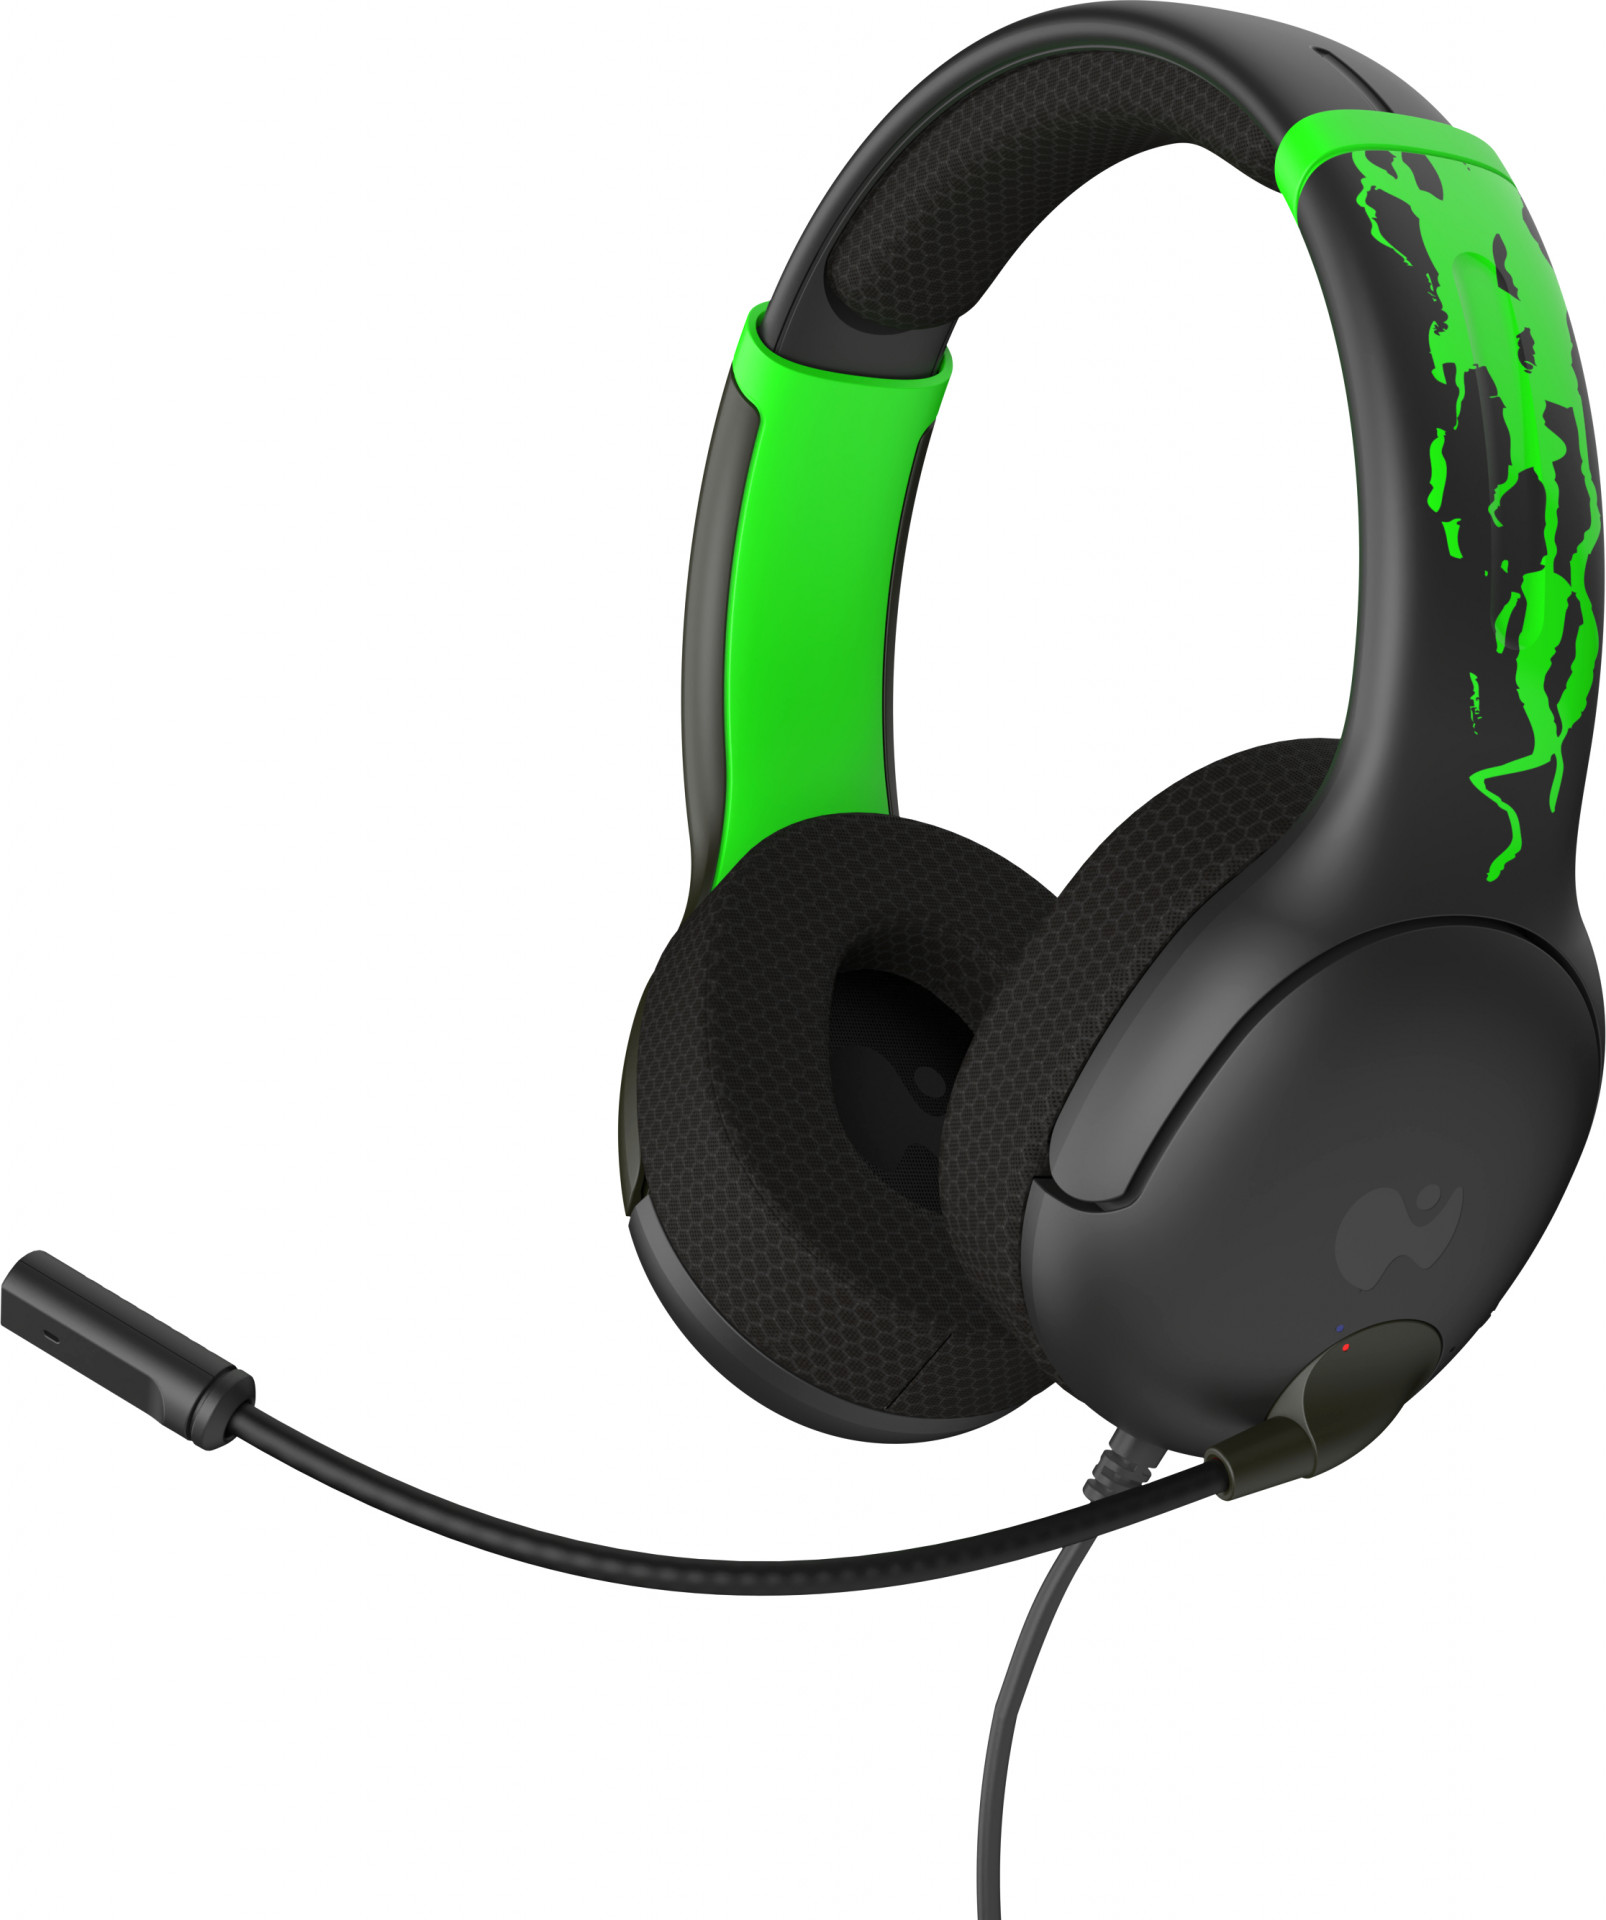 PDP Gaming Airlite Wired Stereo Headset - Jolt Green (Glow in the Dark)